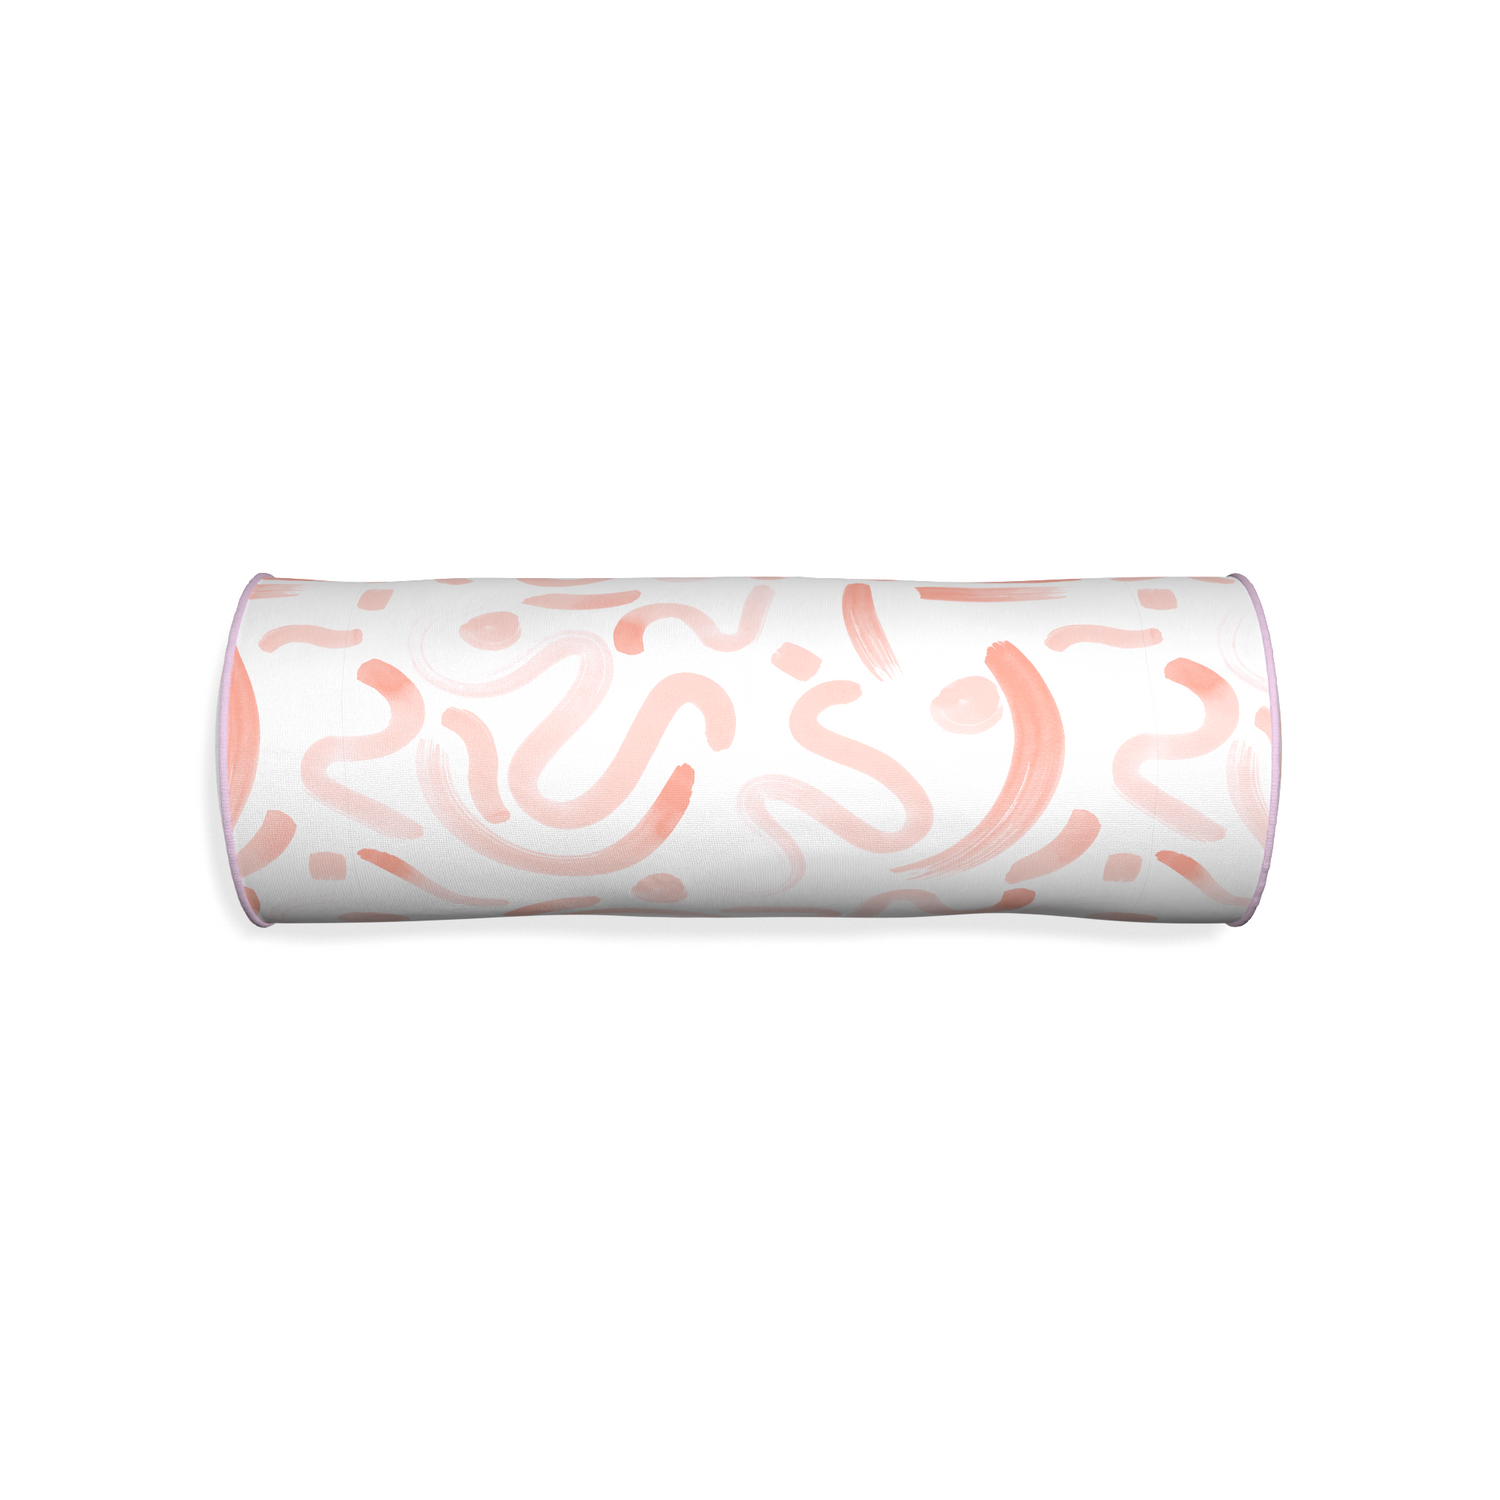 Bolster hockney pink custom pink graphicpillow with l piping on white background